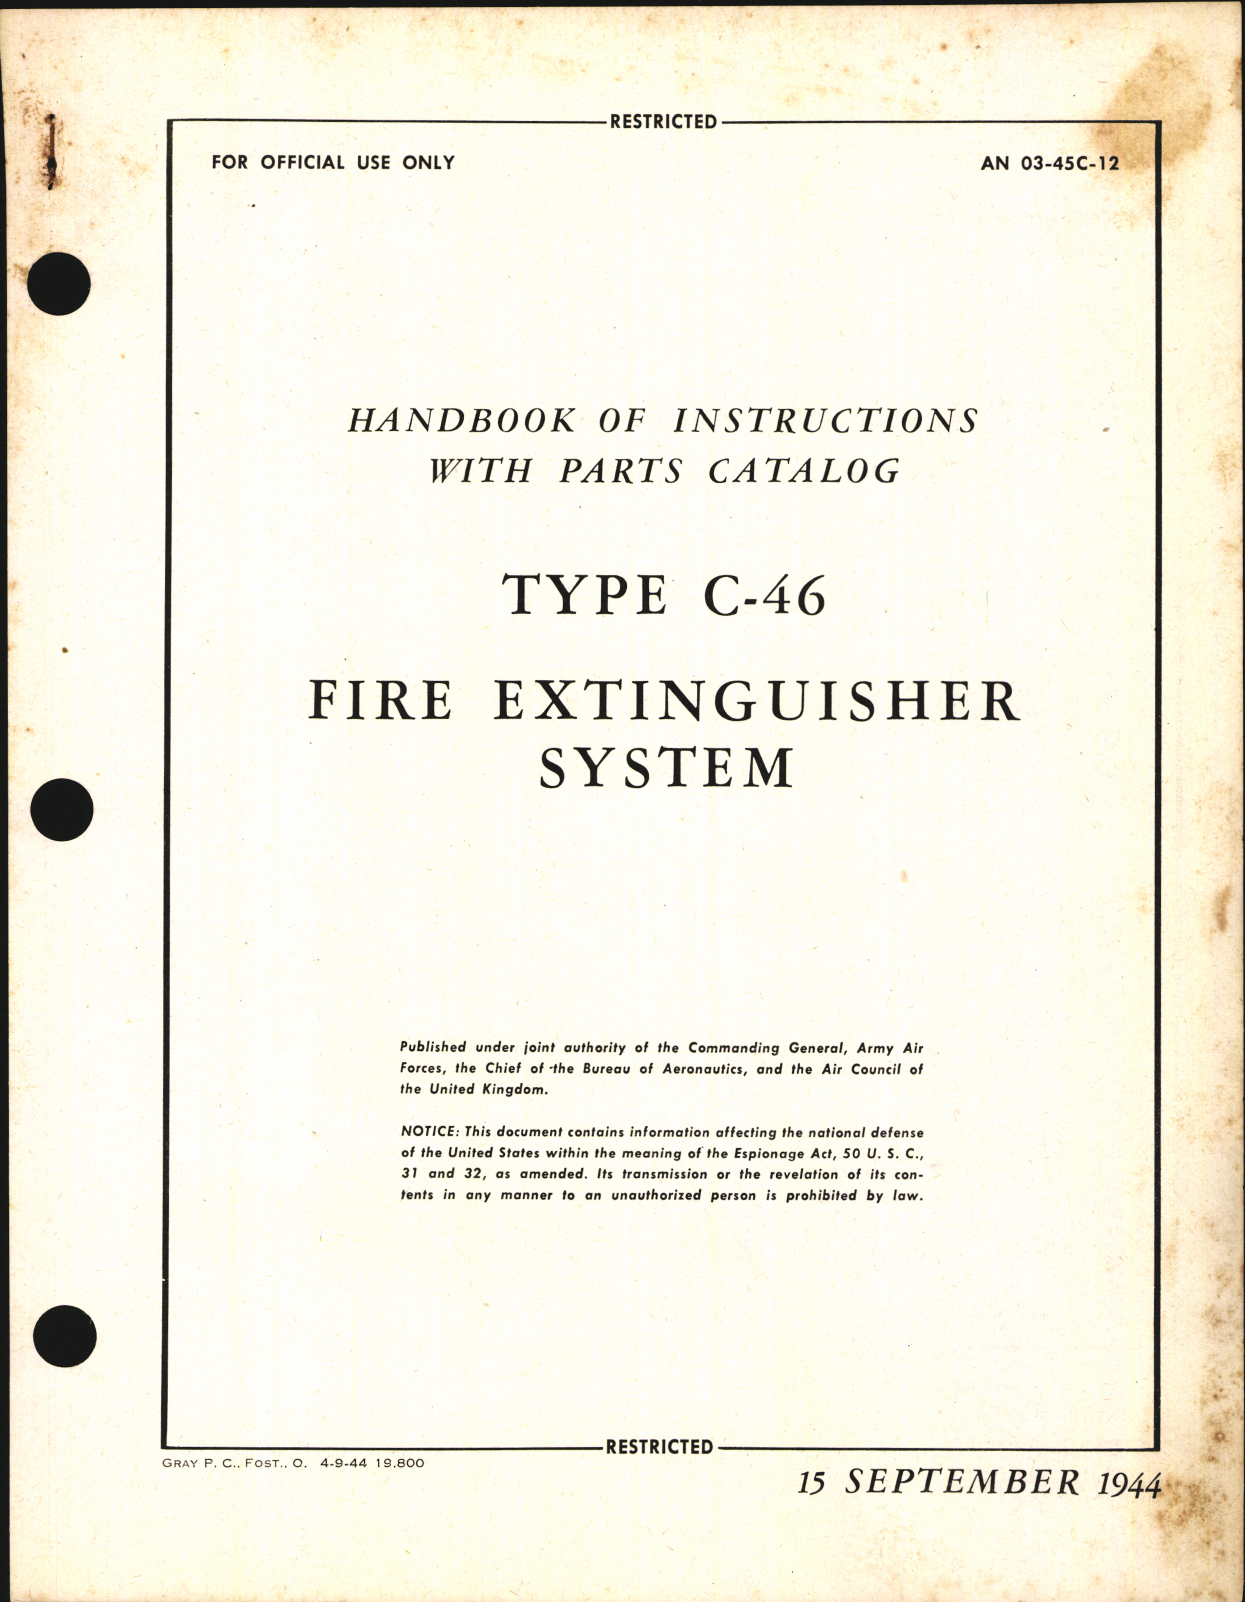 Sample page 1 from AirCorps Library document: Handbook of Instructions with Parts Catalog for Type C-46 Fire Extinguisher System